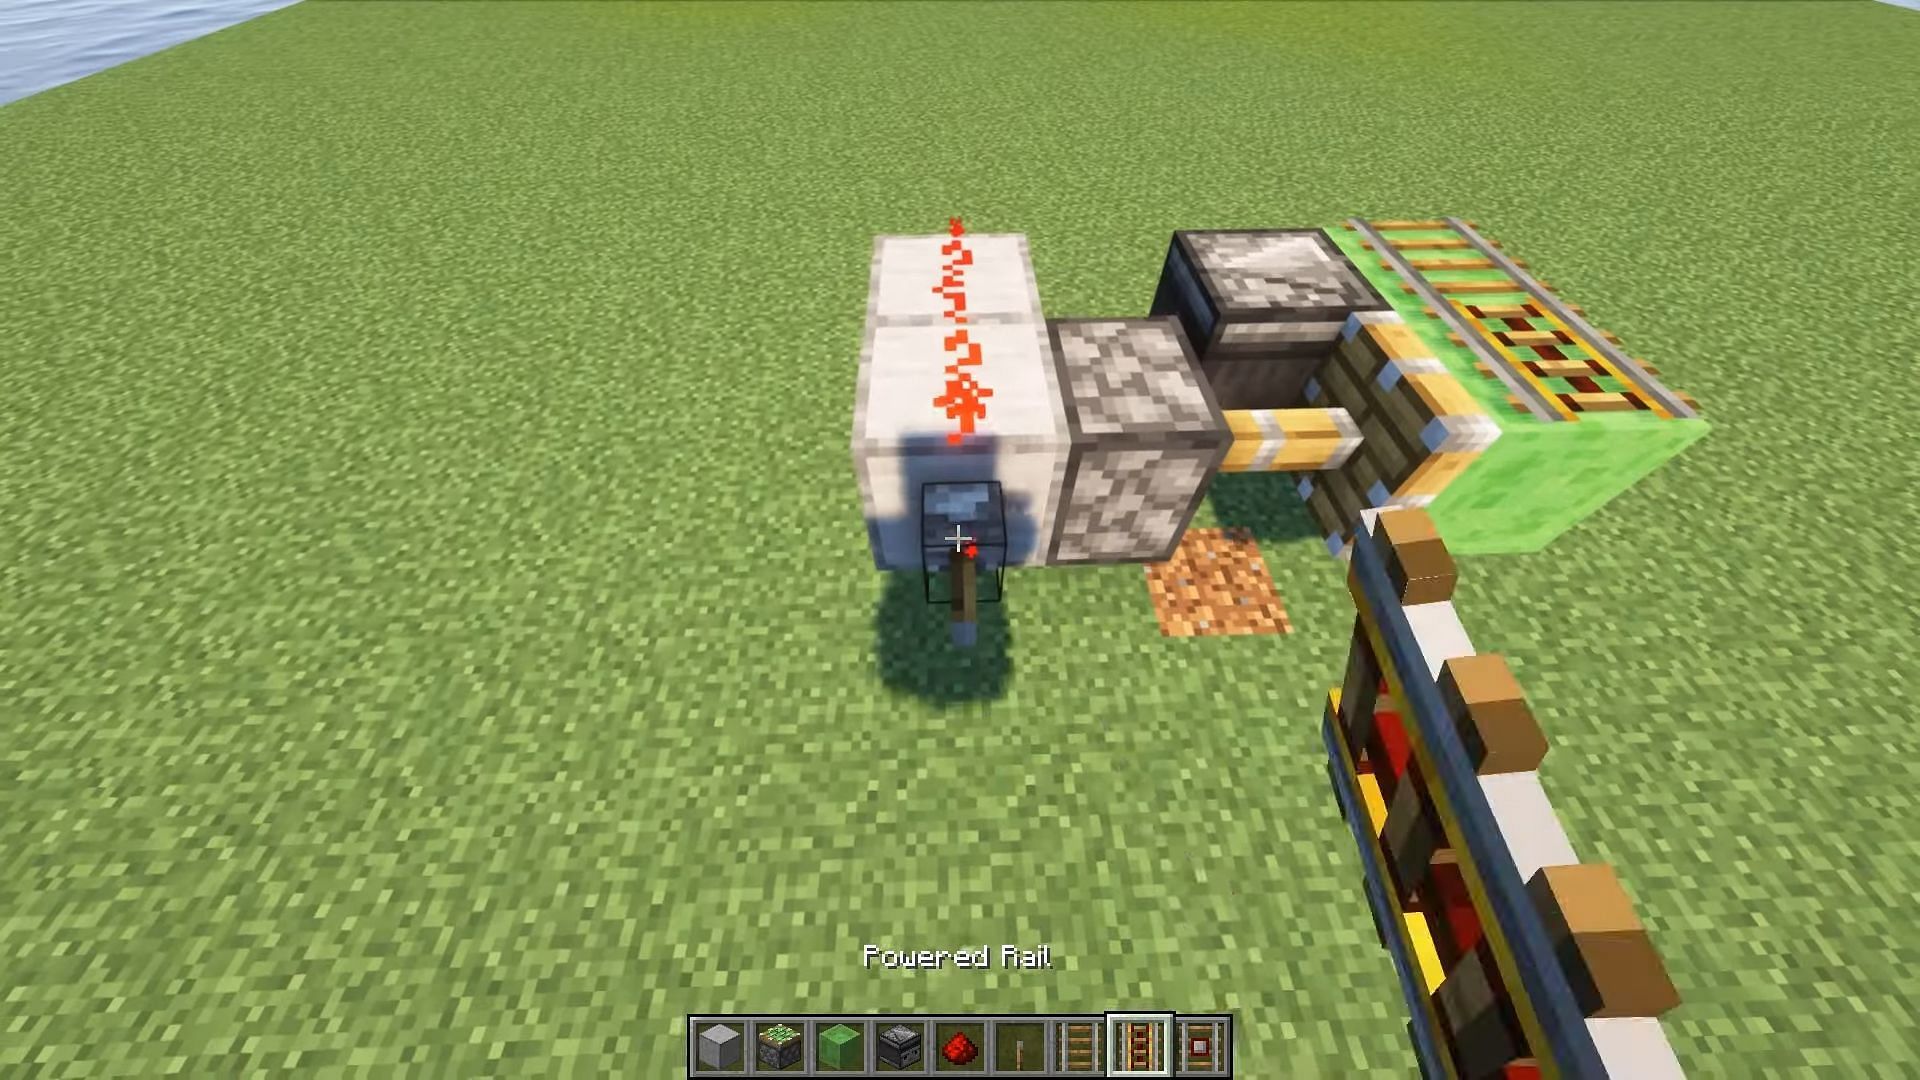 The rail duper is incredibly easy to build in Minecraft (Image via BrianCraft/YouTube)